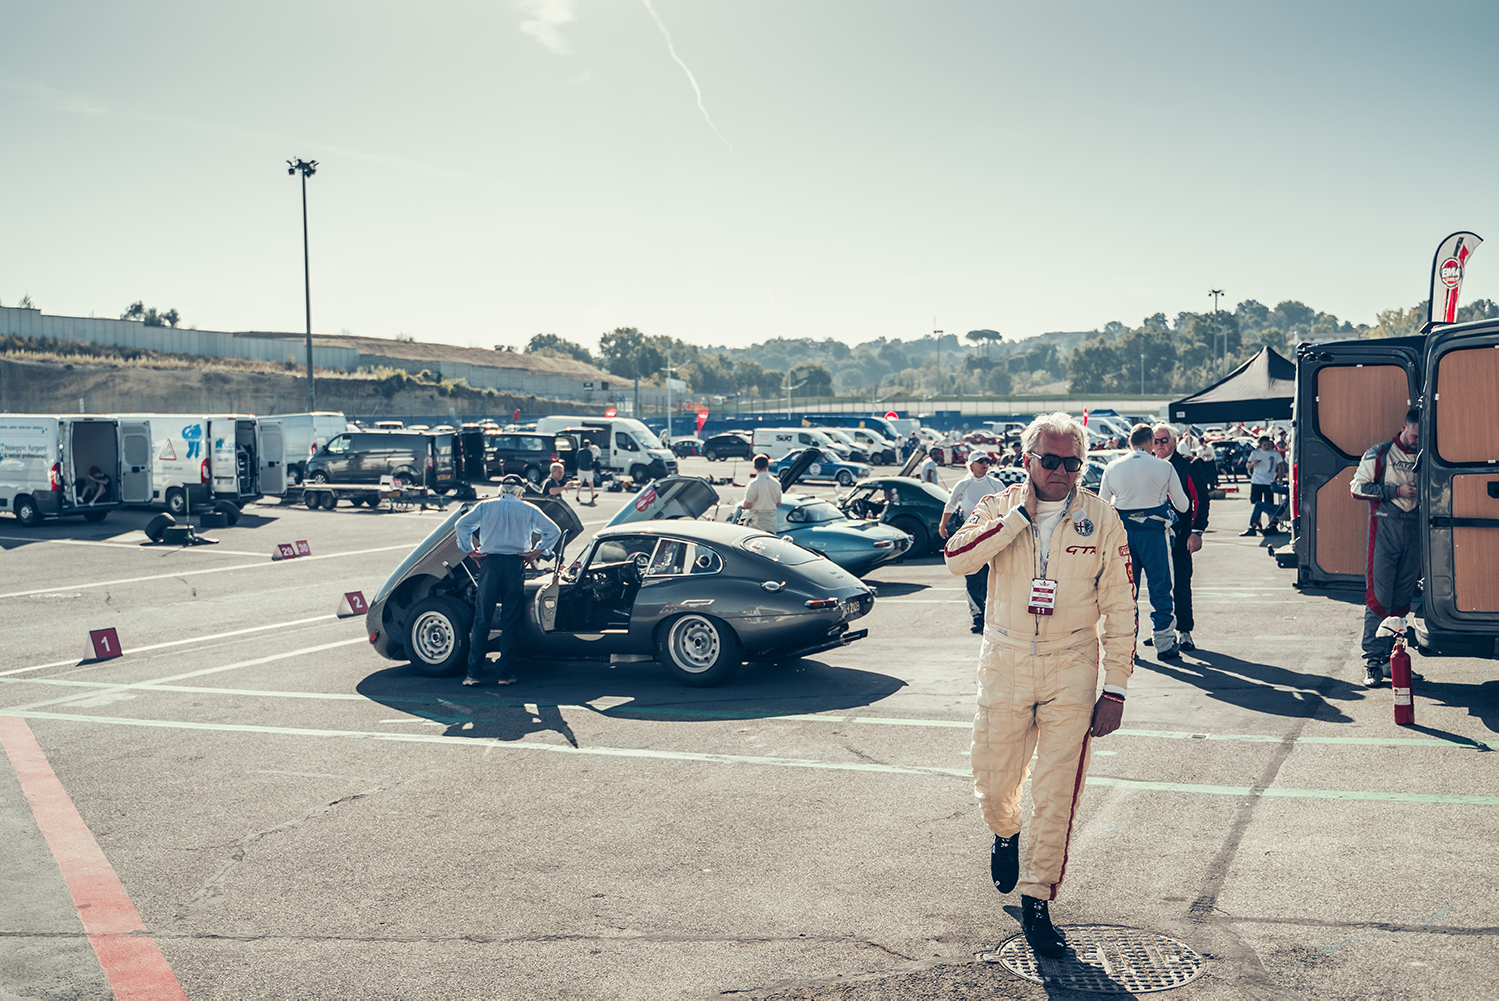 Participants in the Modena Cento Ore gather in a parking lot in Italy